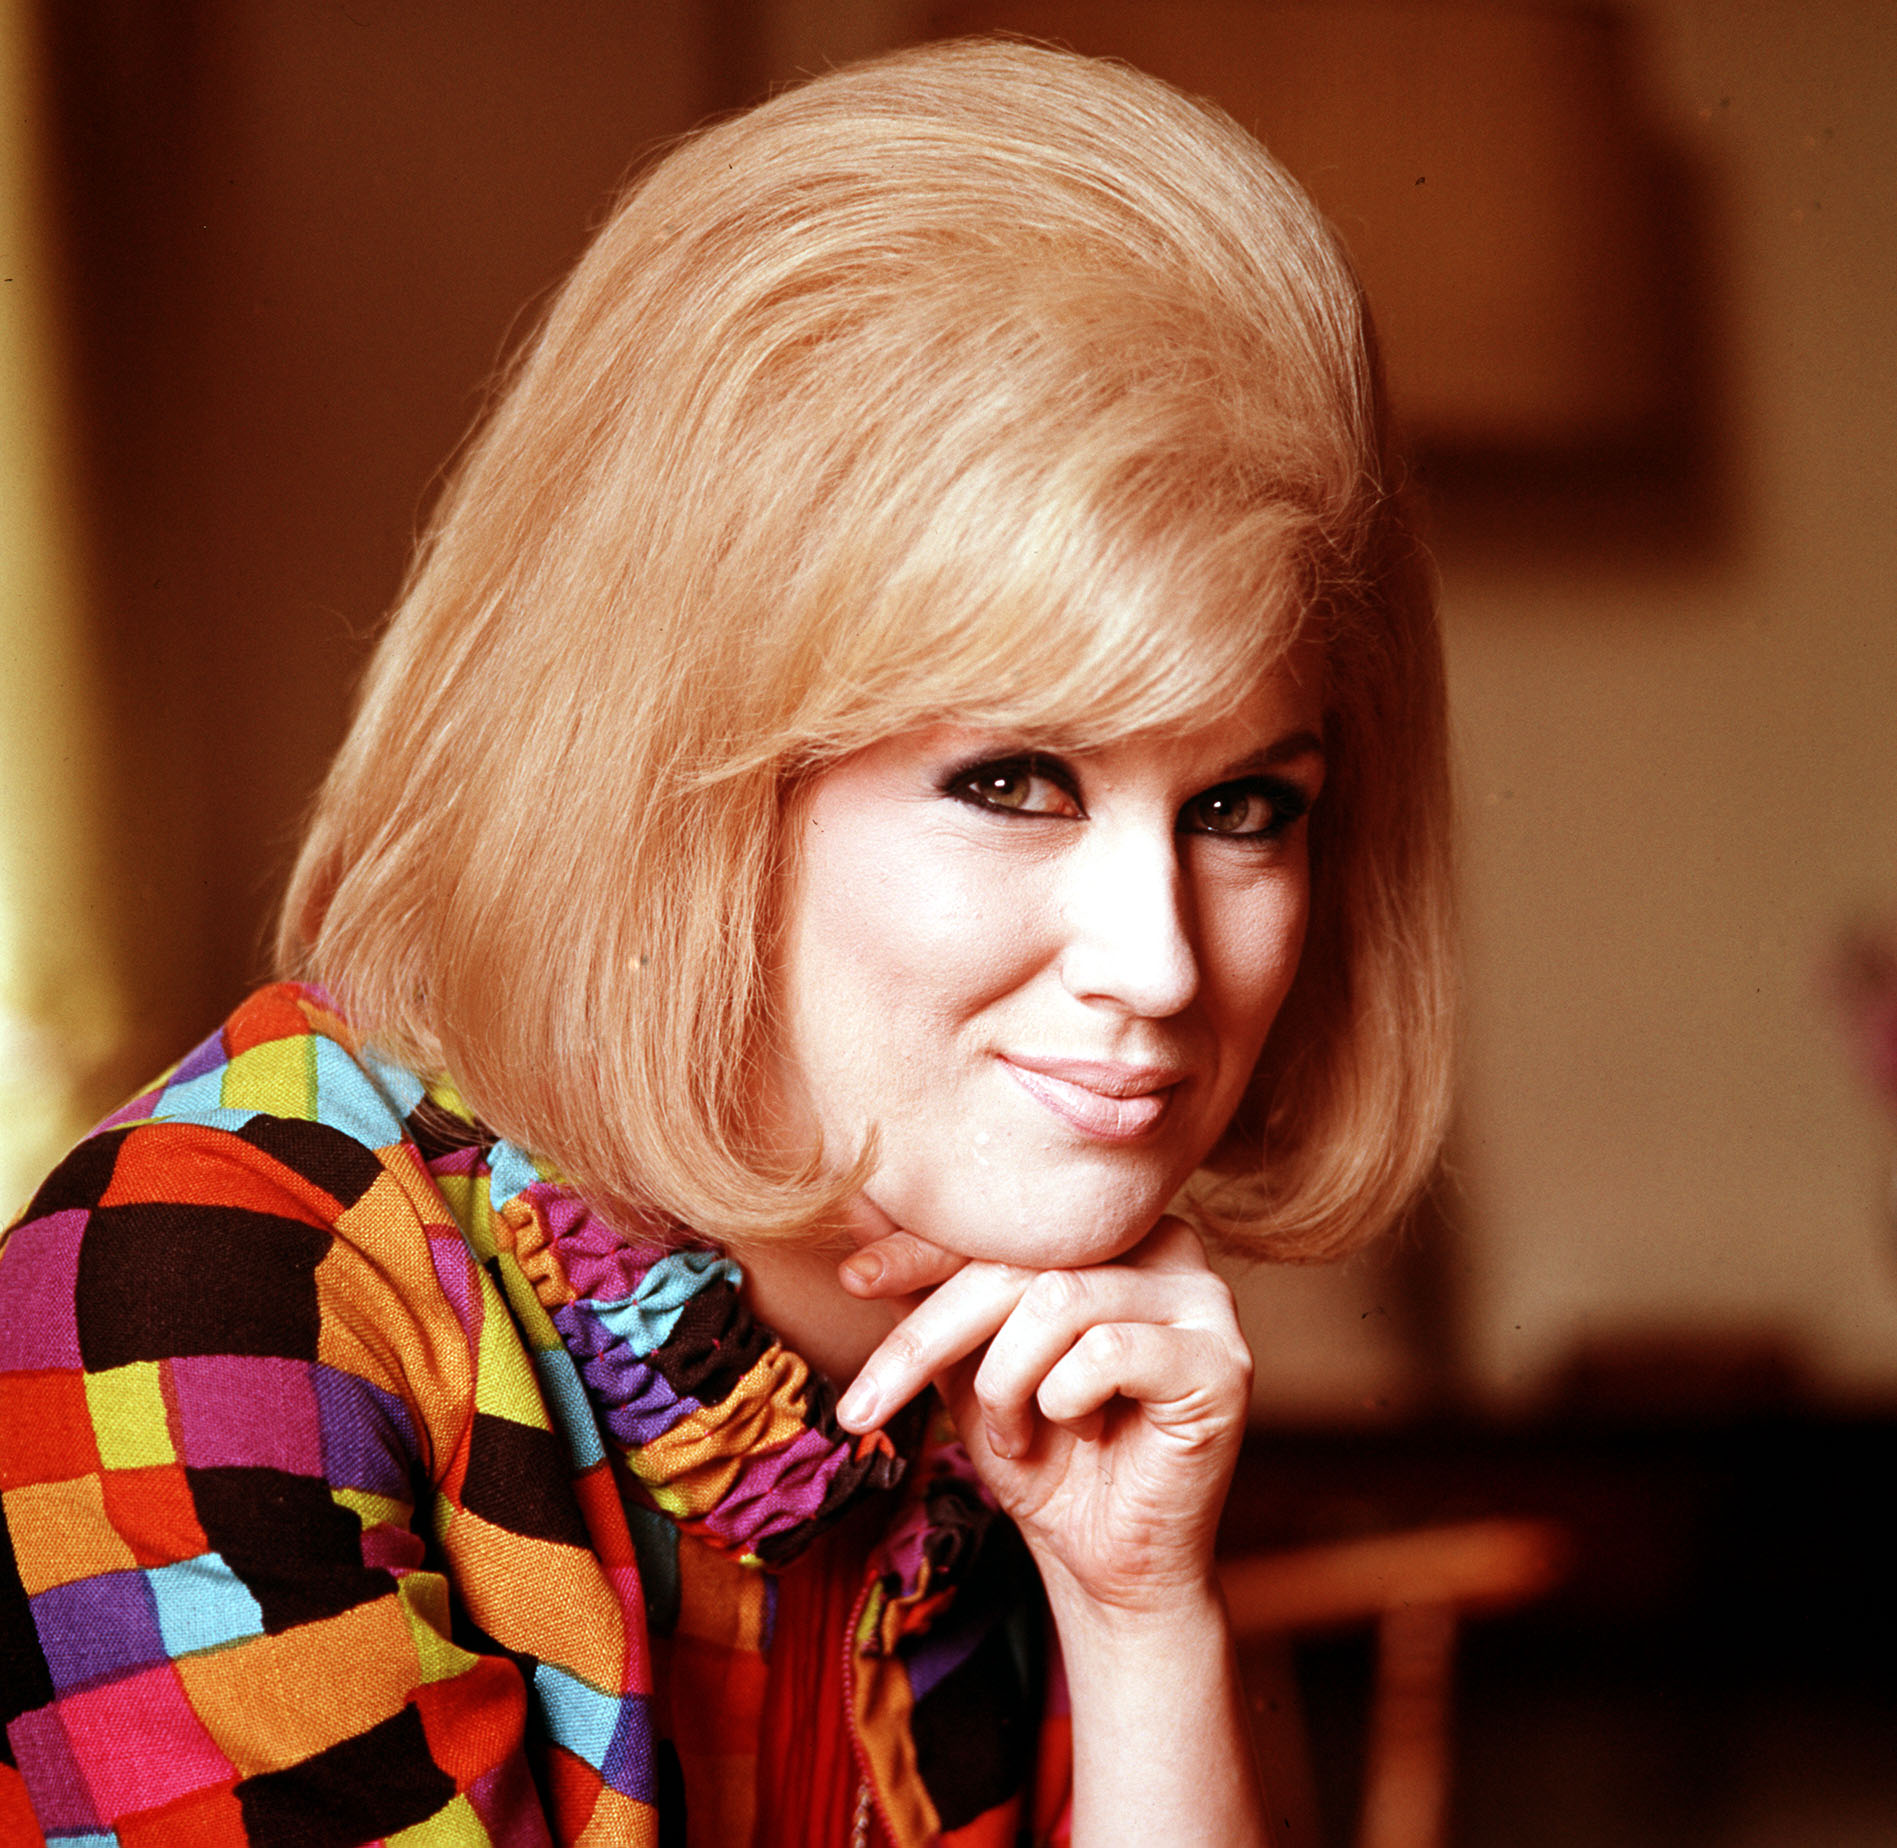 A portrait of Dusty Springfield from 1965. | Source: Getty Images